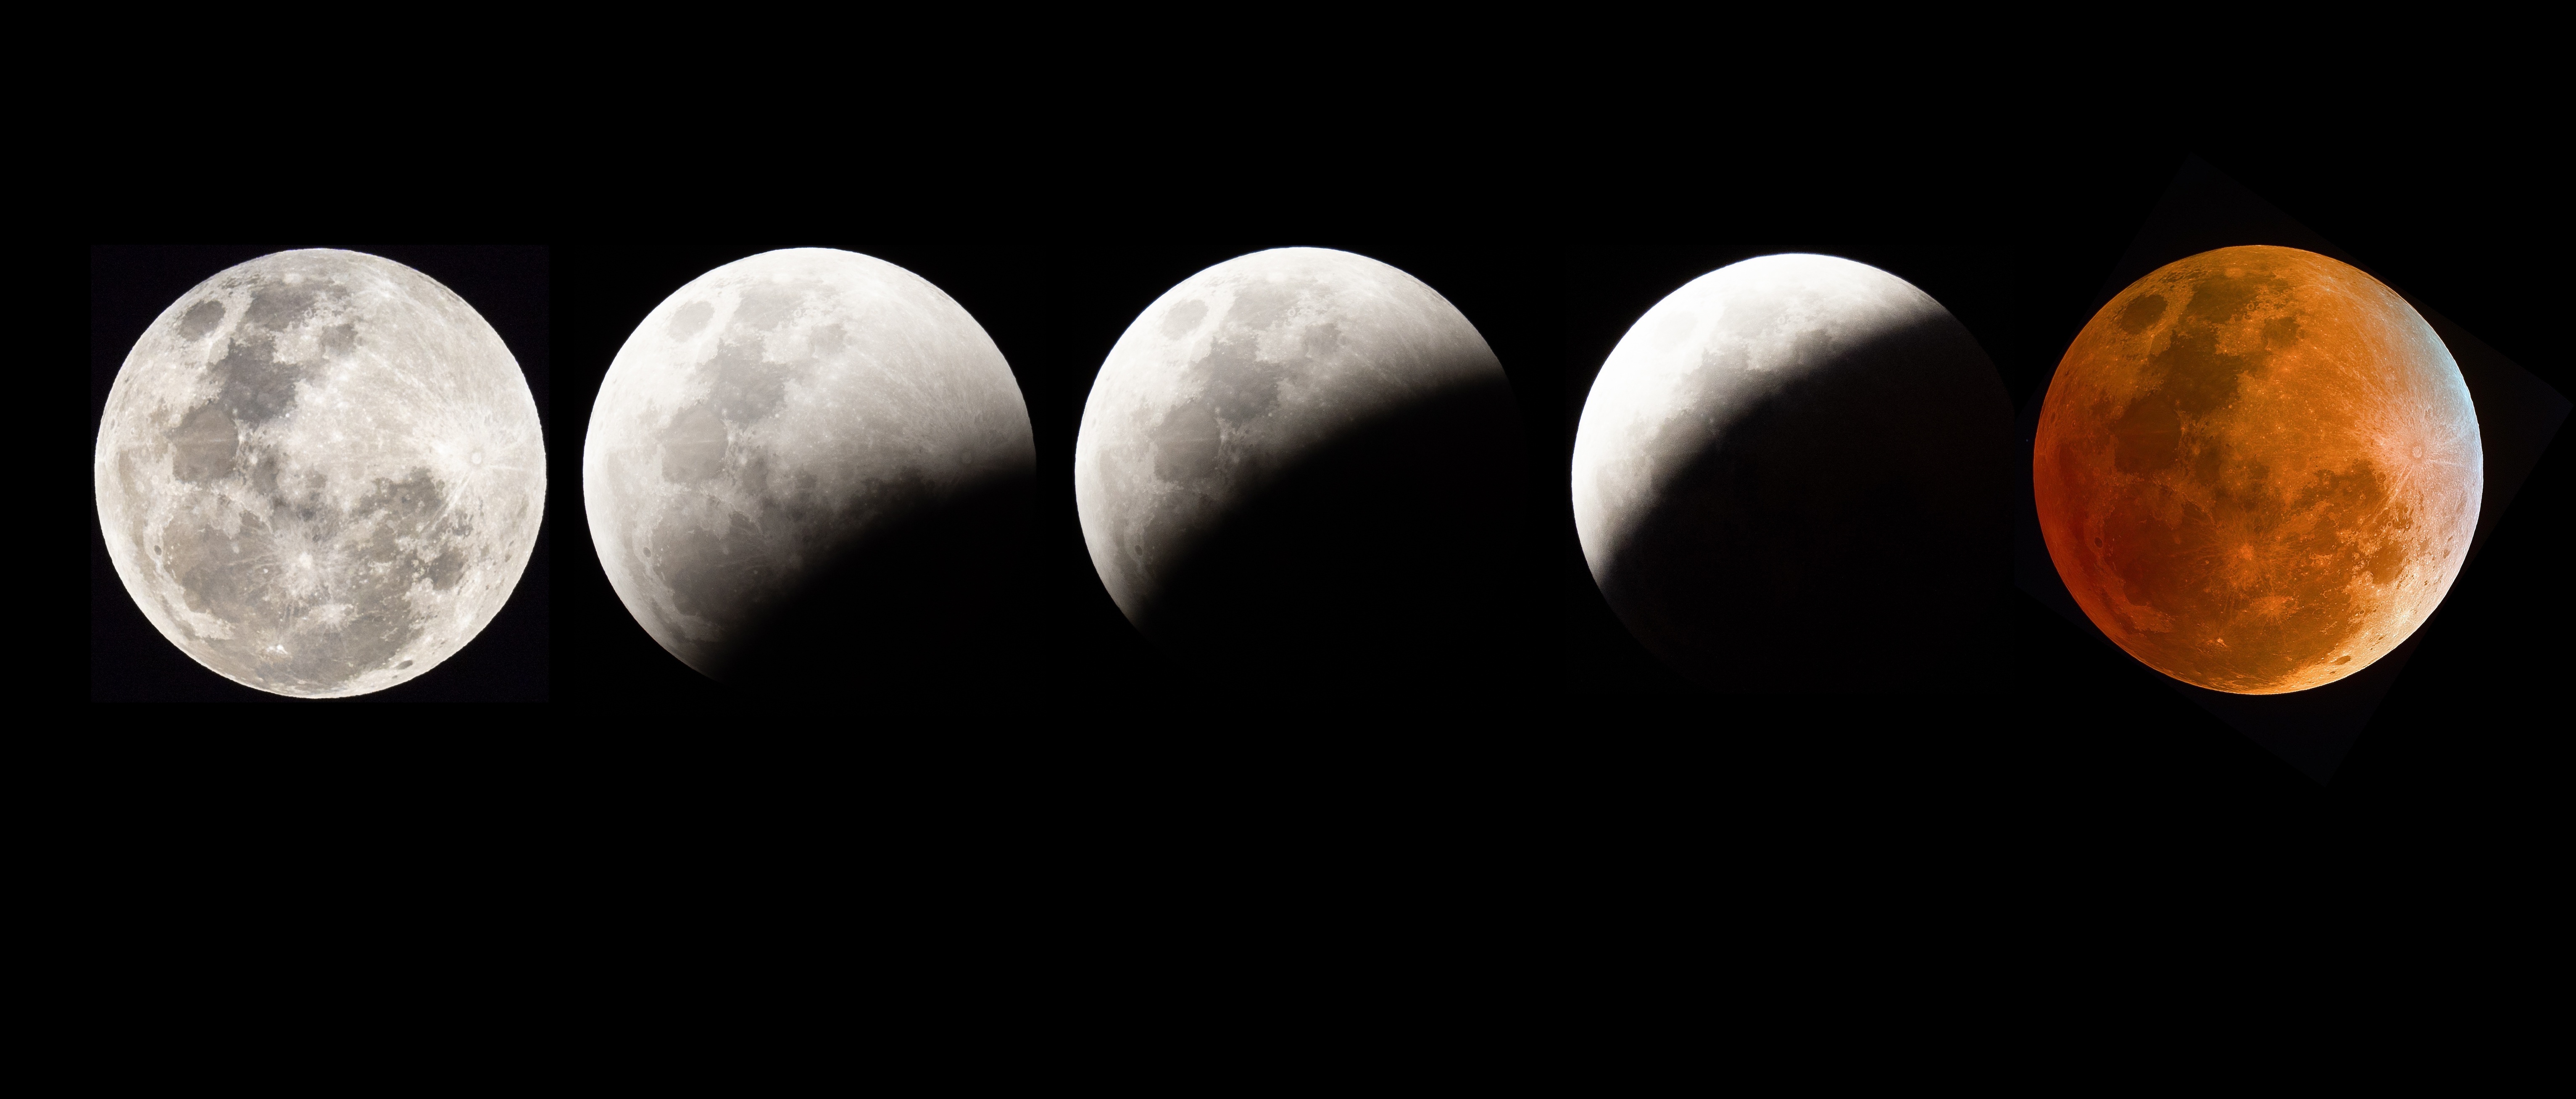 the moon shown in various phases across a black sky, the last phase is colored dark red